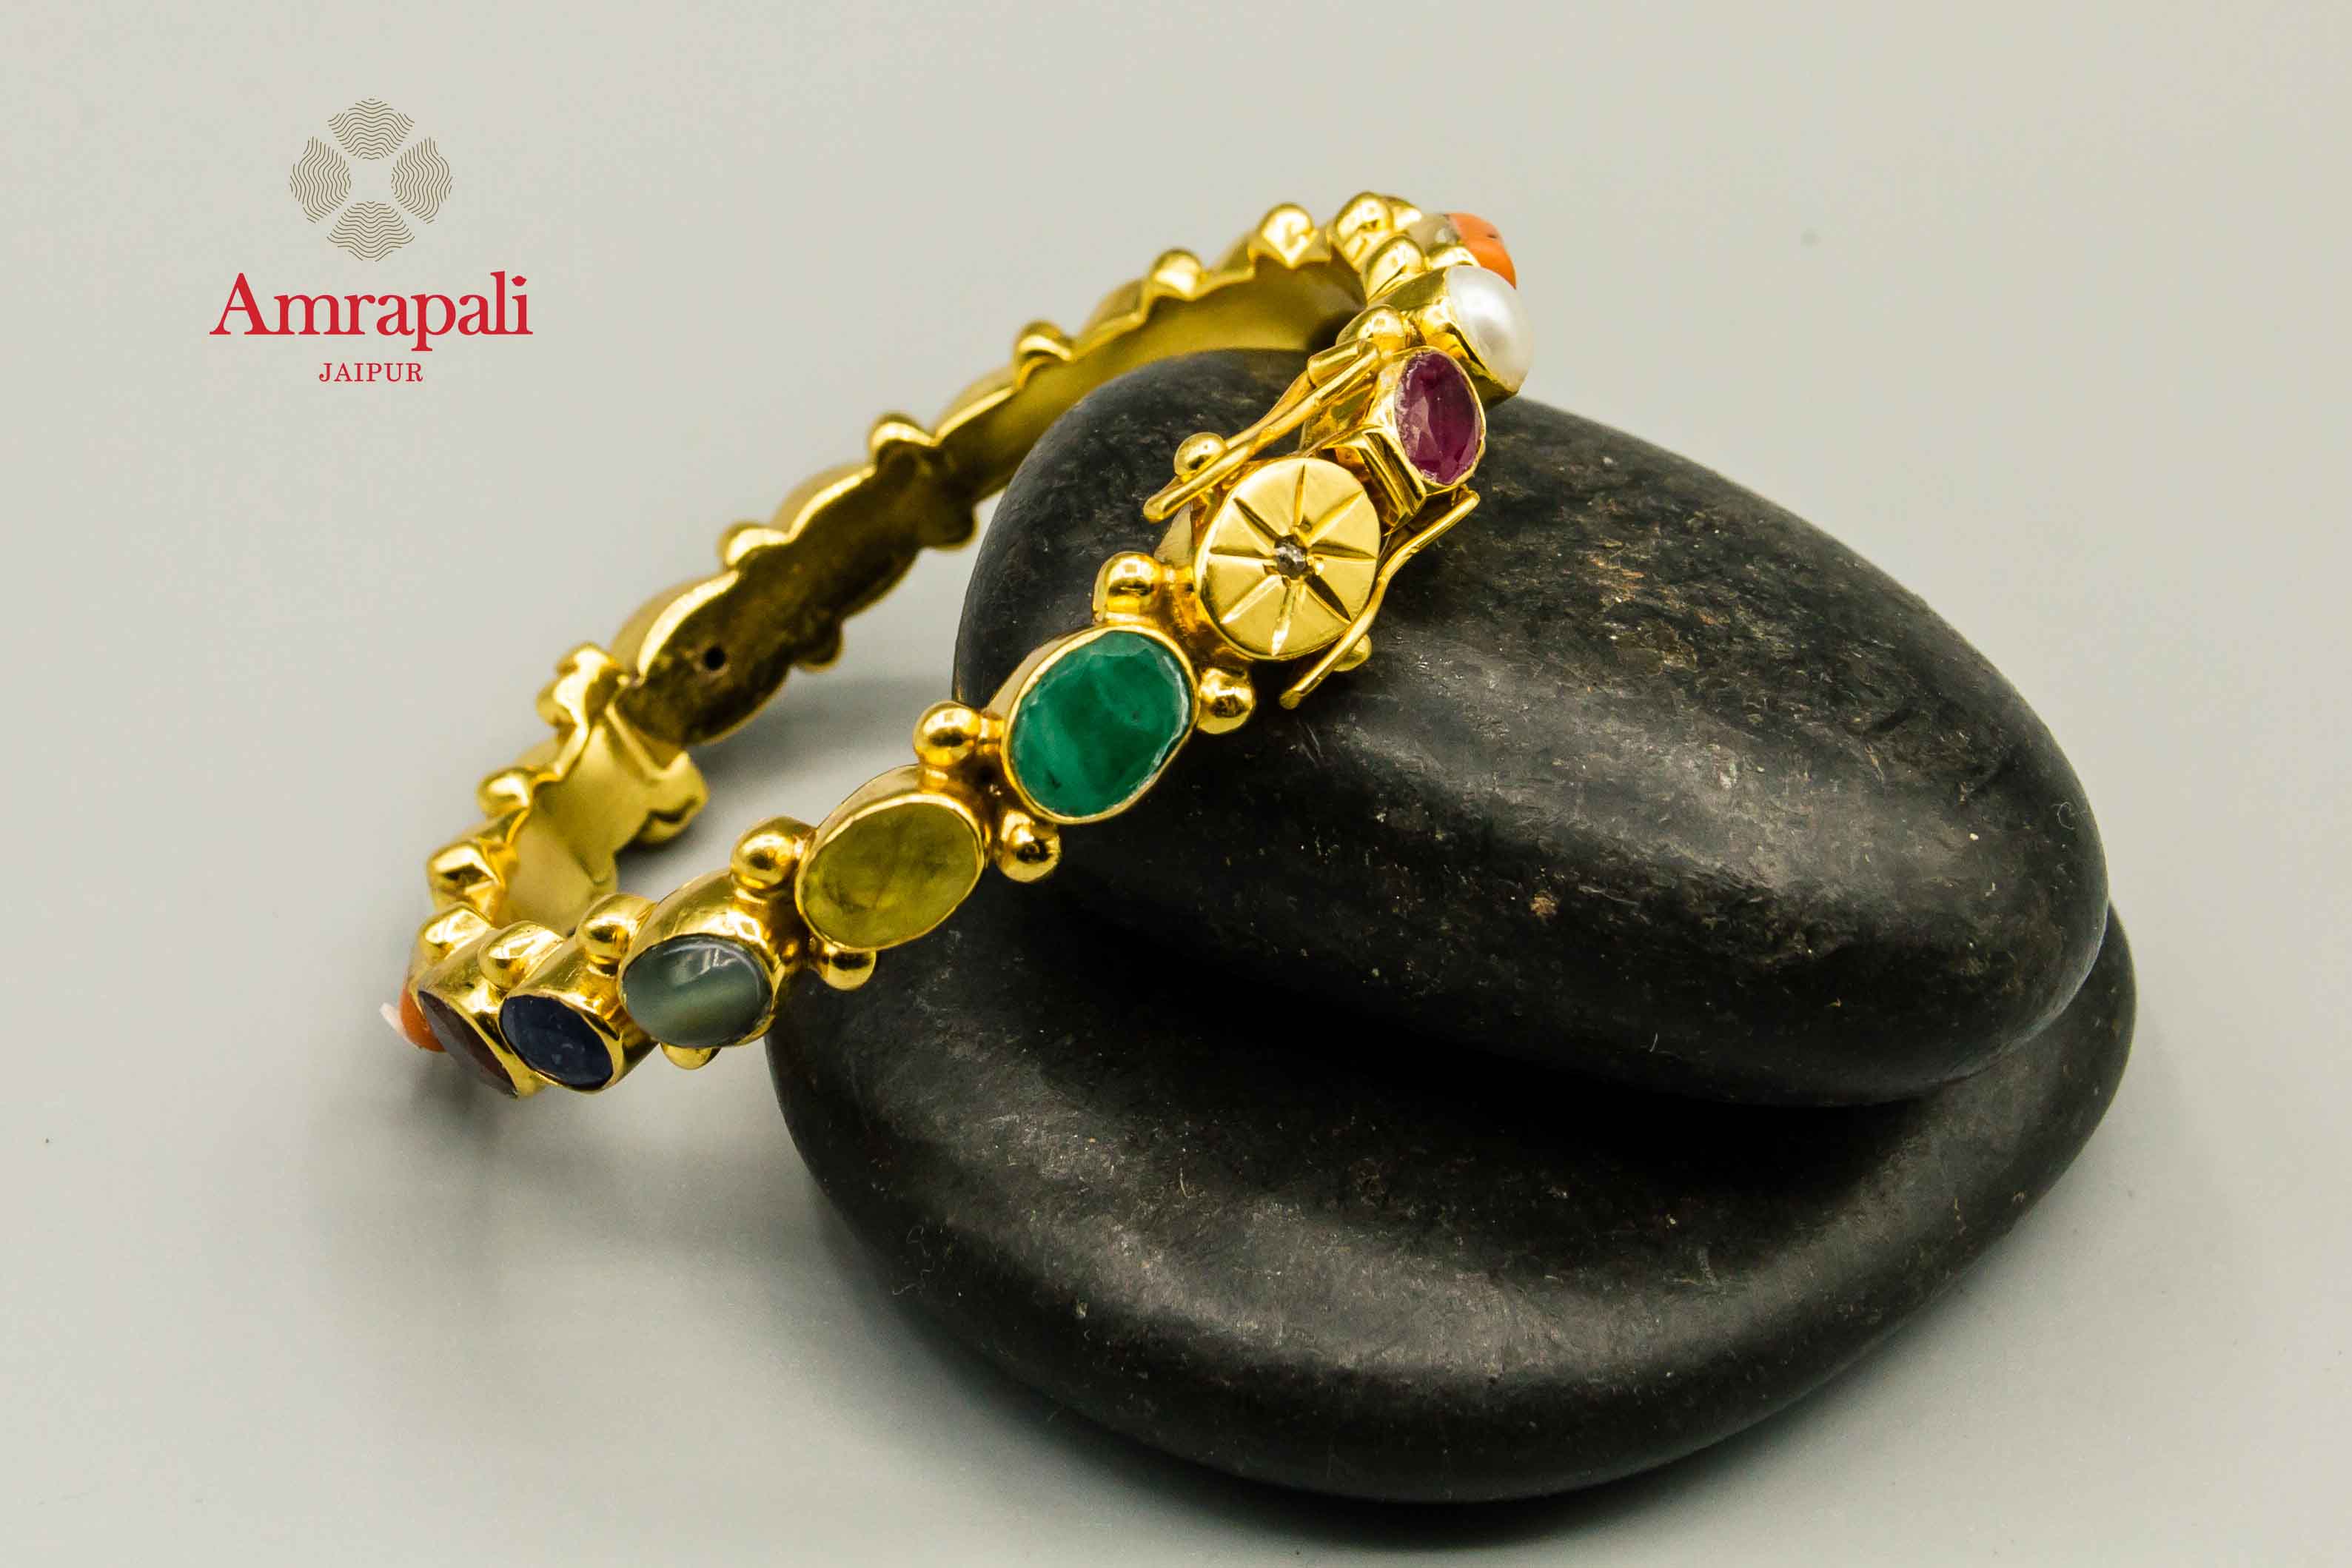 Buy Amrapali multicolored stone silver gold plated bangle online in USA. Raise your traditional fashion quotient on special occasions with exquisite Indian jewelry from Pure Elegance Indian clothing store in USA. Enhance your look with silver gold plated jewelry, silver jewellery available online.-flatlay